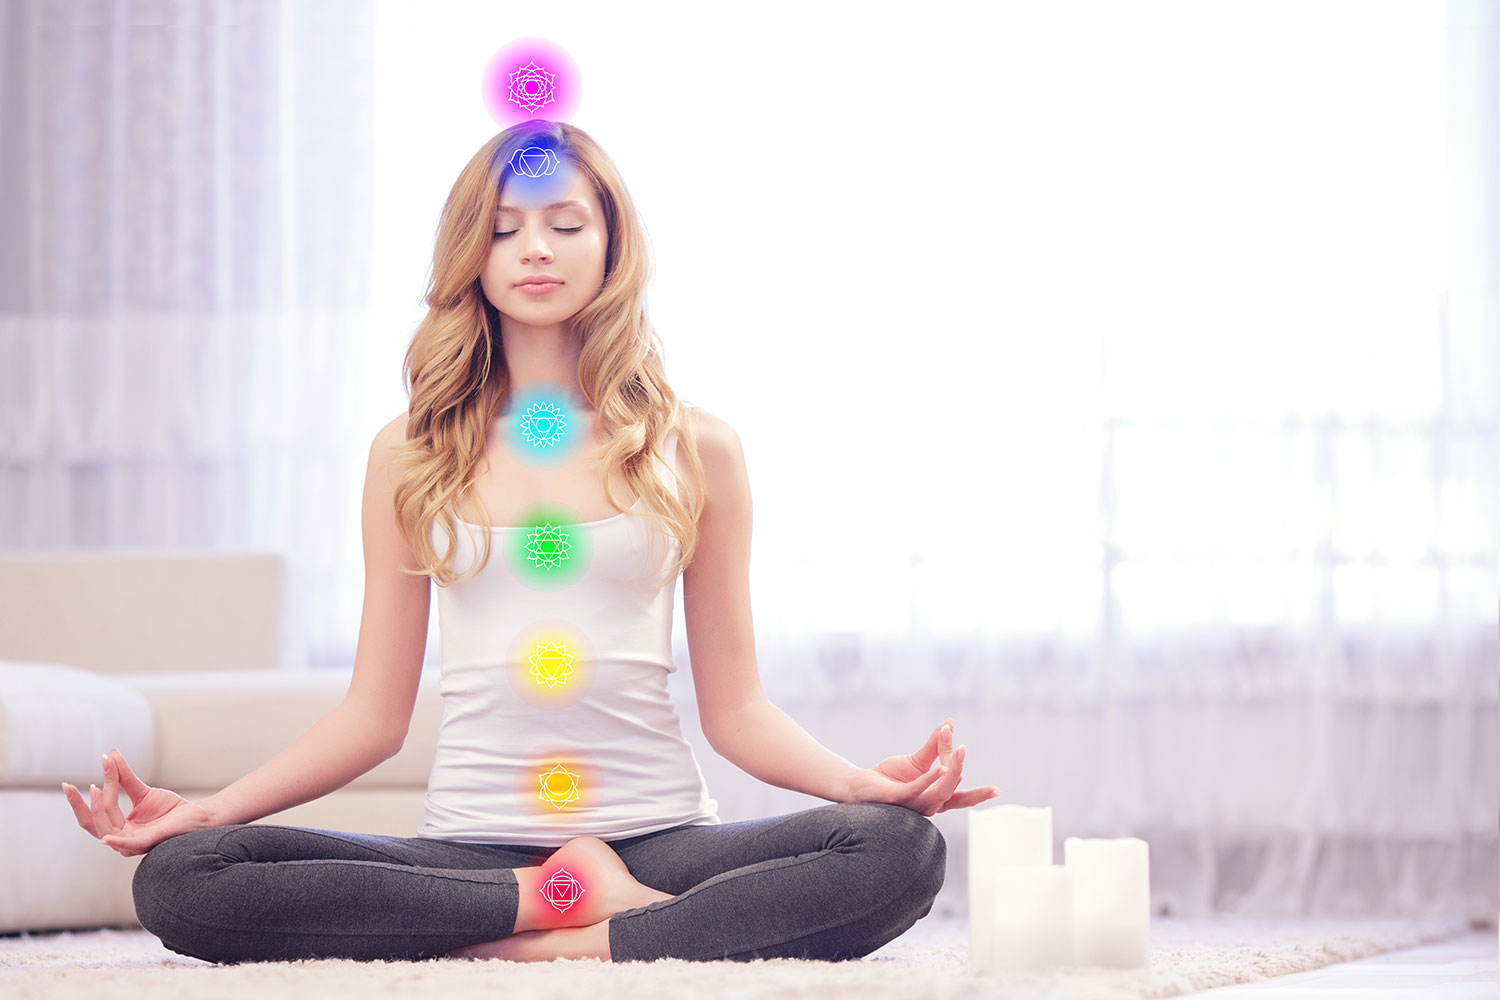 Chakra Cleansing Step by Step Guide to Free Your Energy